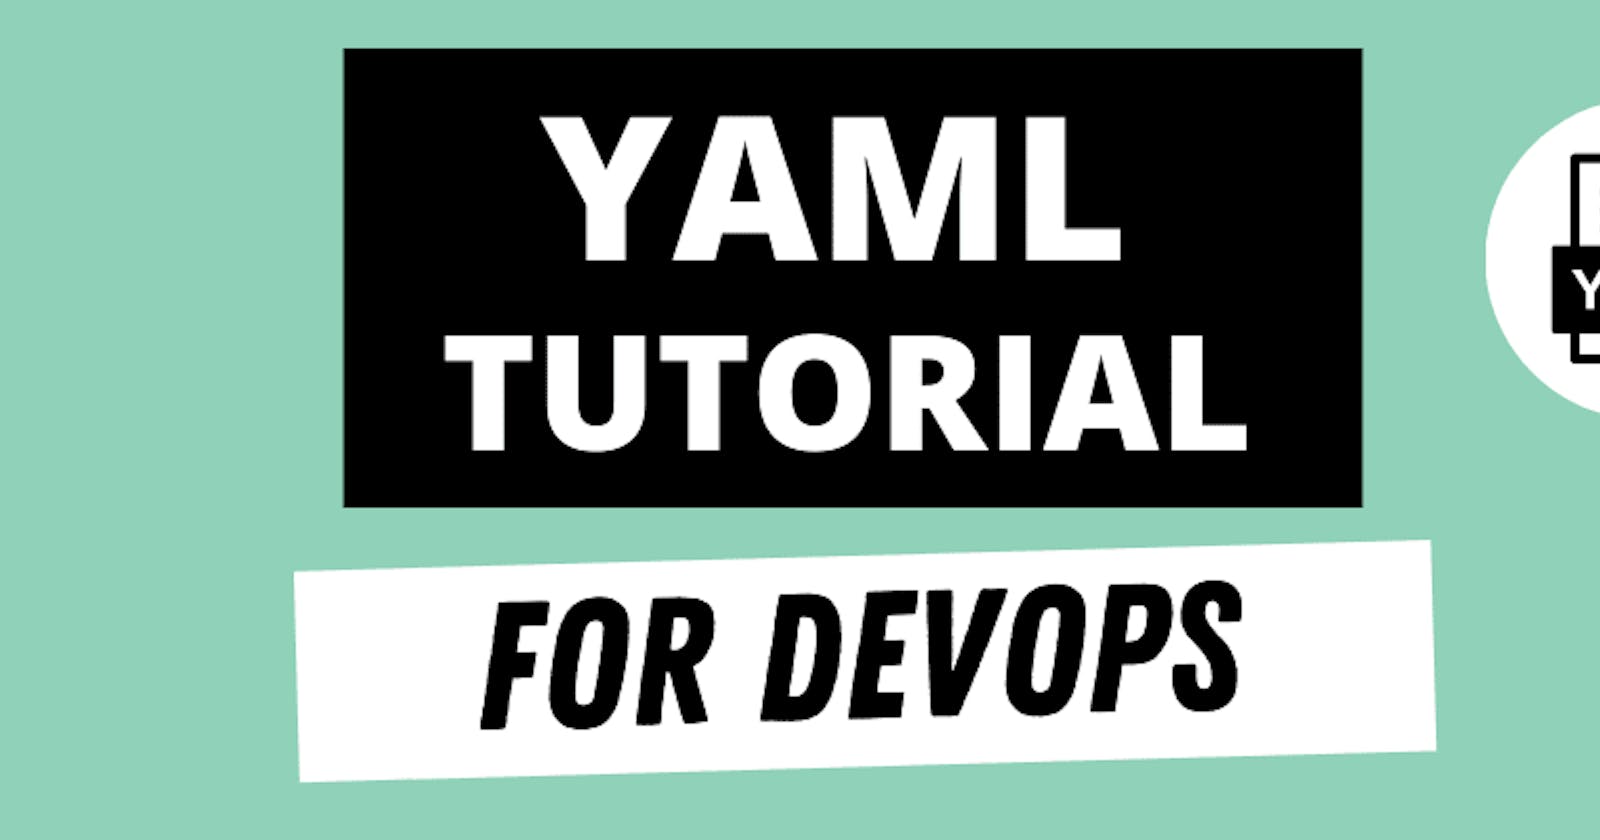 Complete YAML tutorial basic to advance